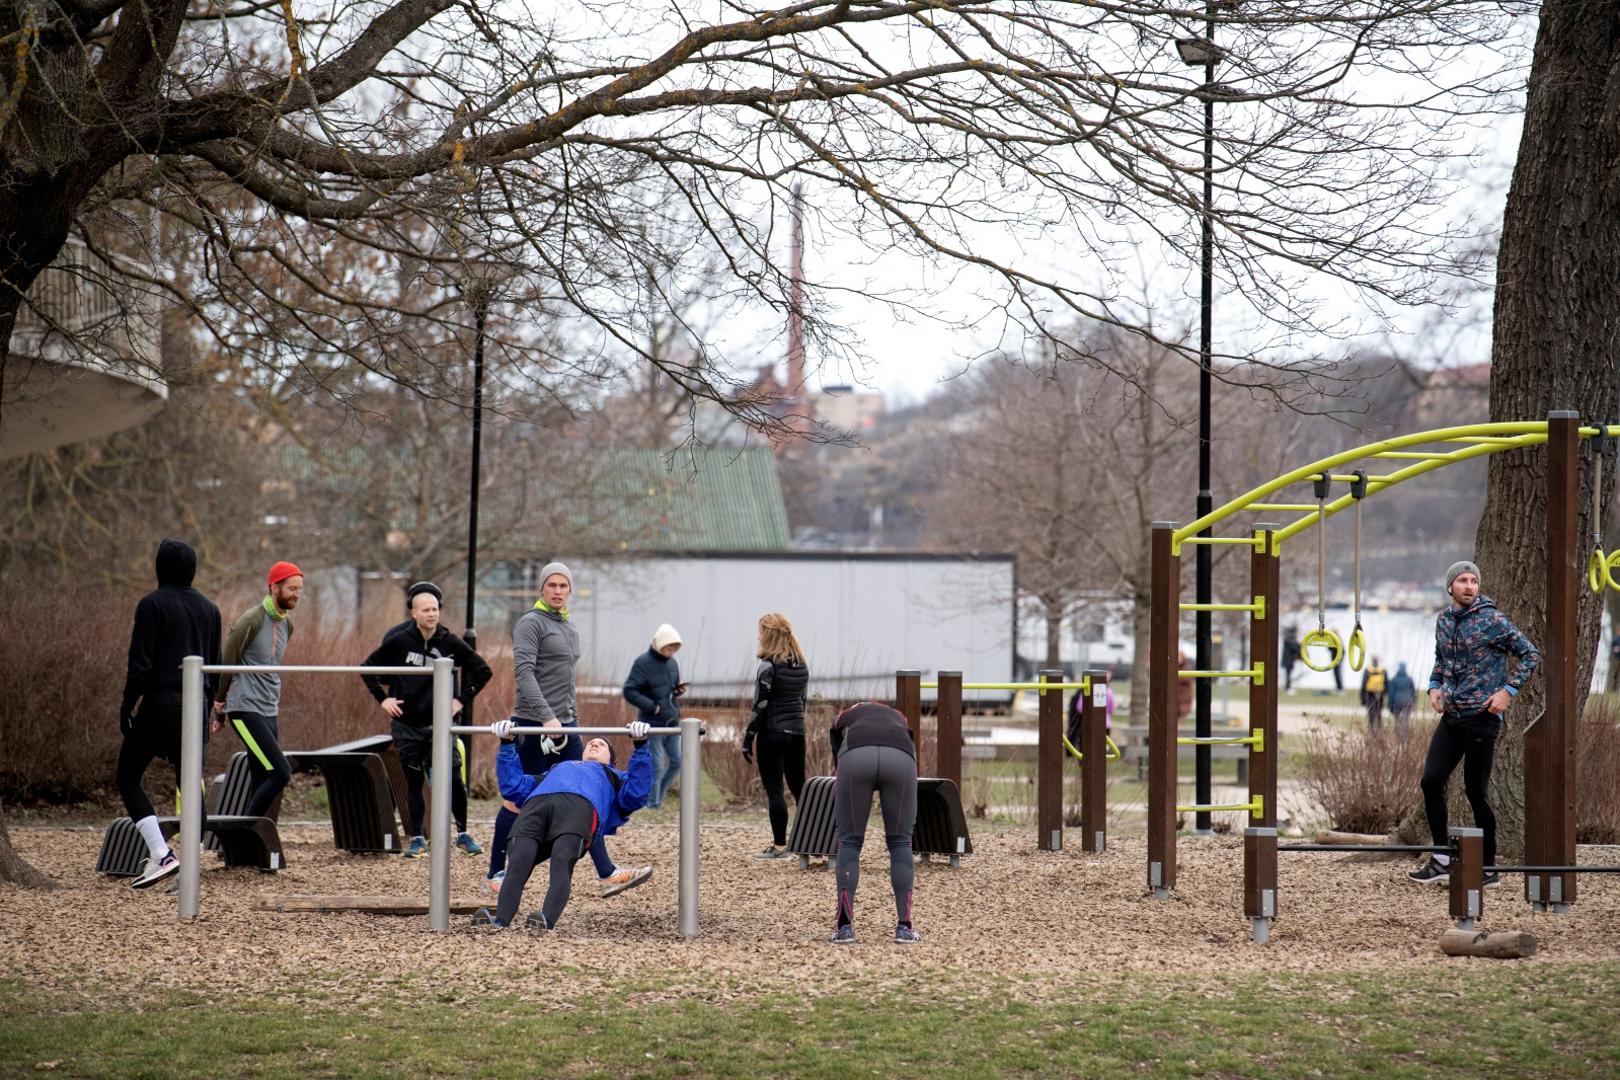 The spread of the coronavirus disease (COVID-19) in Stockholm People exercise at an outdoor gym in a park in central Stockholm, as the spread of the coronavirus disease  continues (COVID-19) in Stockholm, Sweden April 1, 2020. TT News Agency/Jessica Gow  via REUTERS   ATTENTION EDITORS - THIS IMAGE WAS PROVIDED BY A THIRD PARTY. SWEDEN OUT. NO COMMERCIAL OR EDITORIAL SALES IN SWE TT NEWS AGENCY